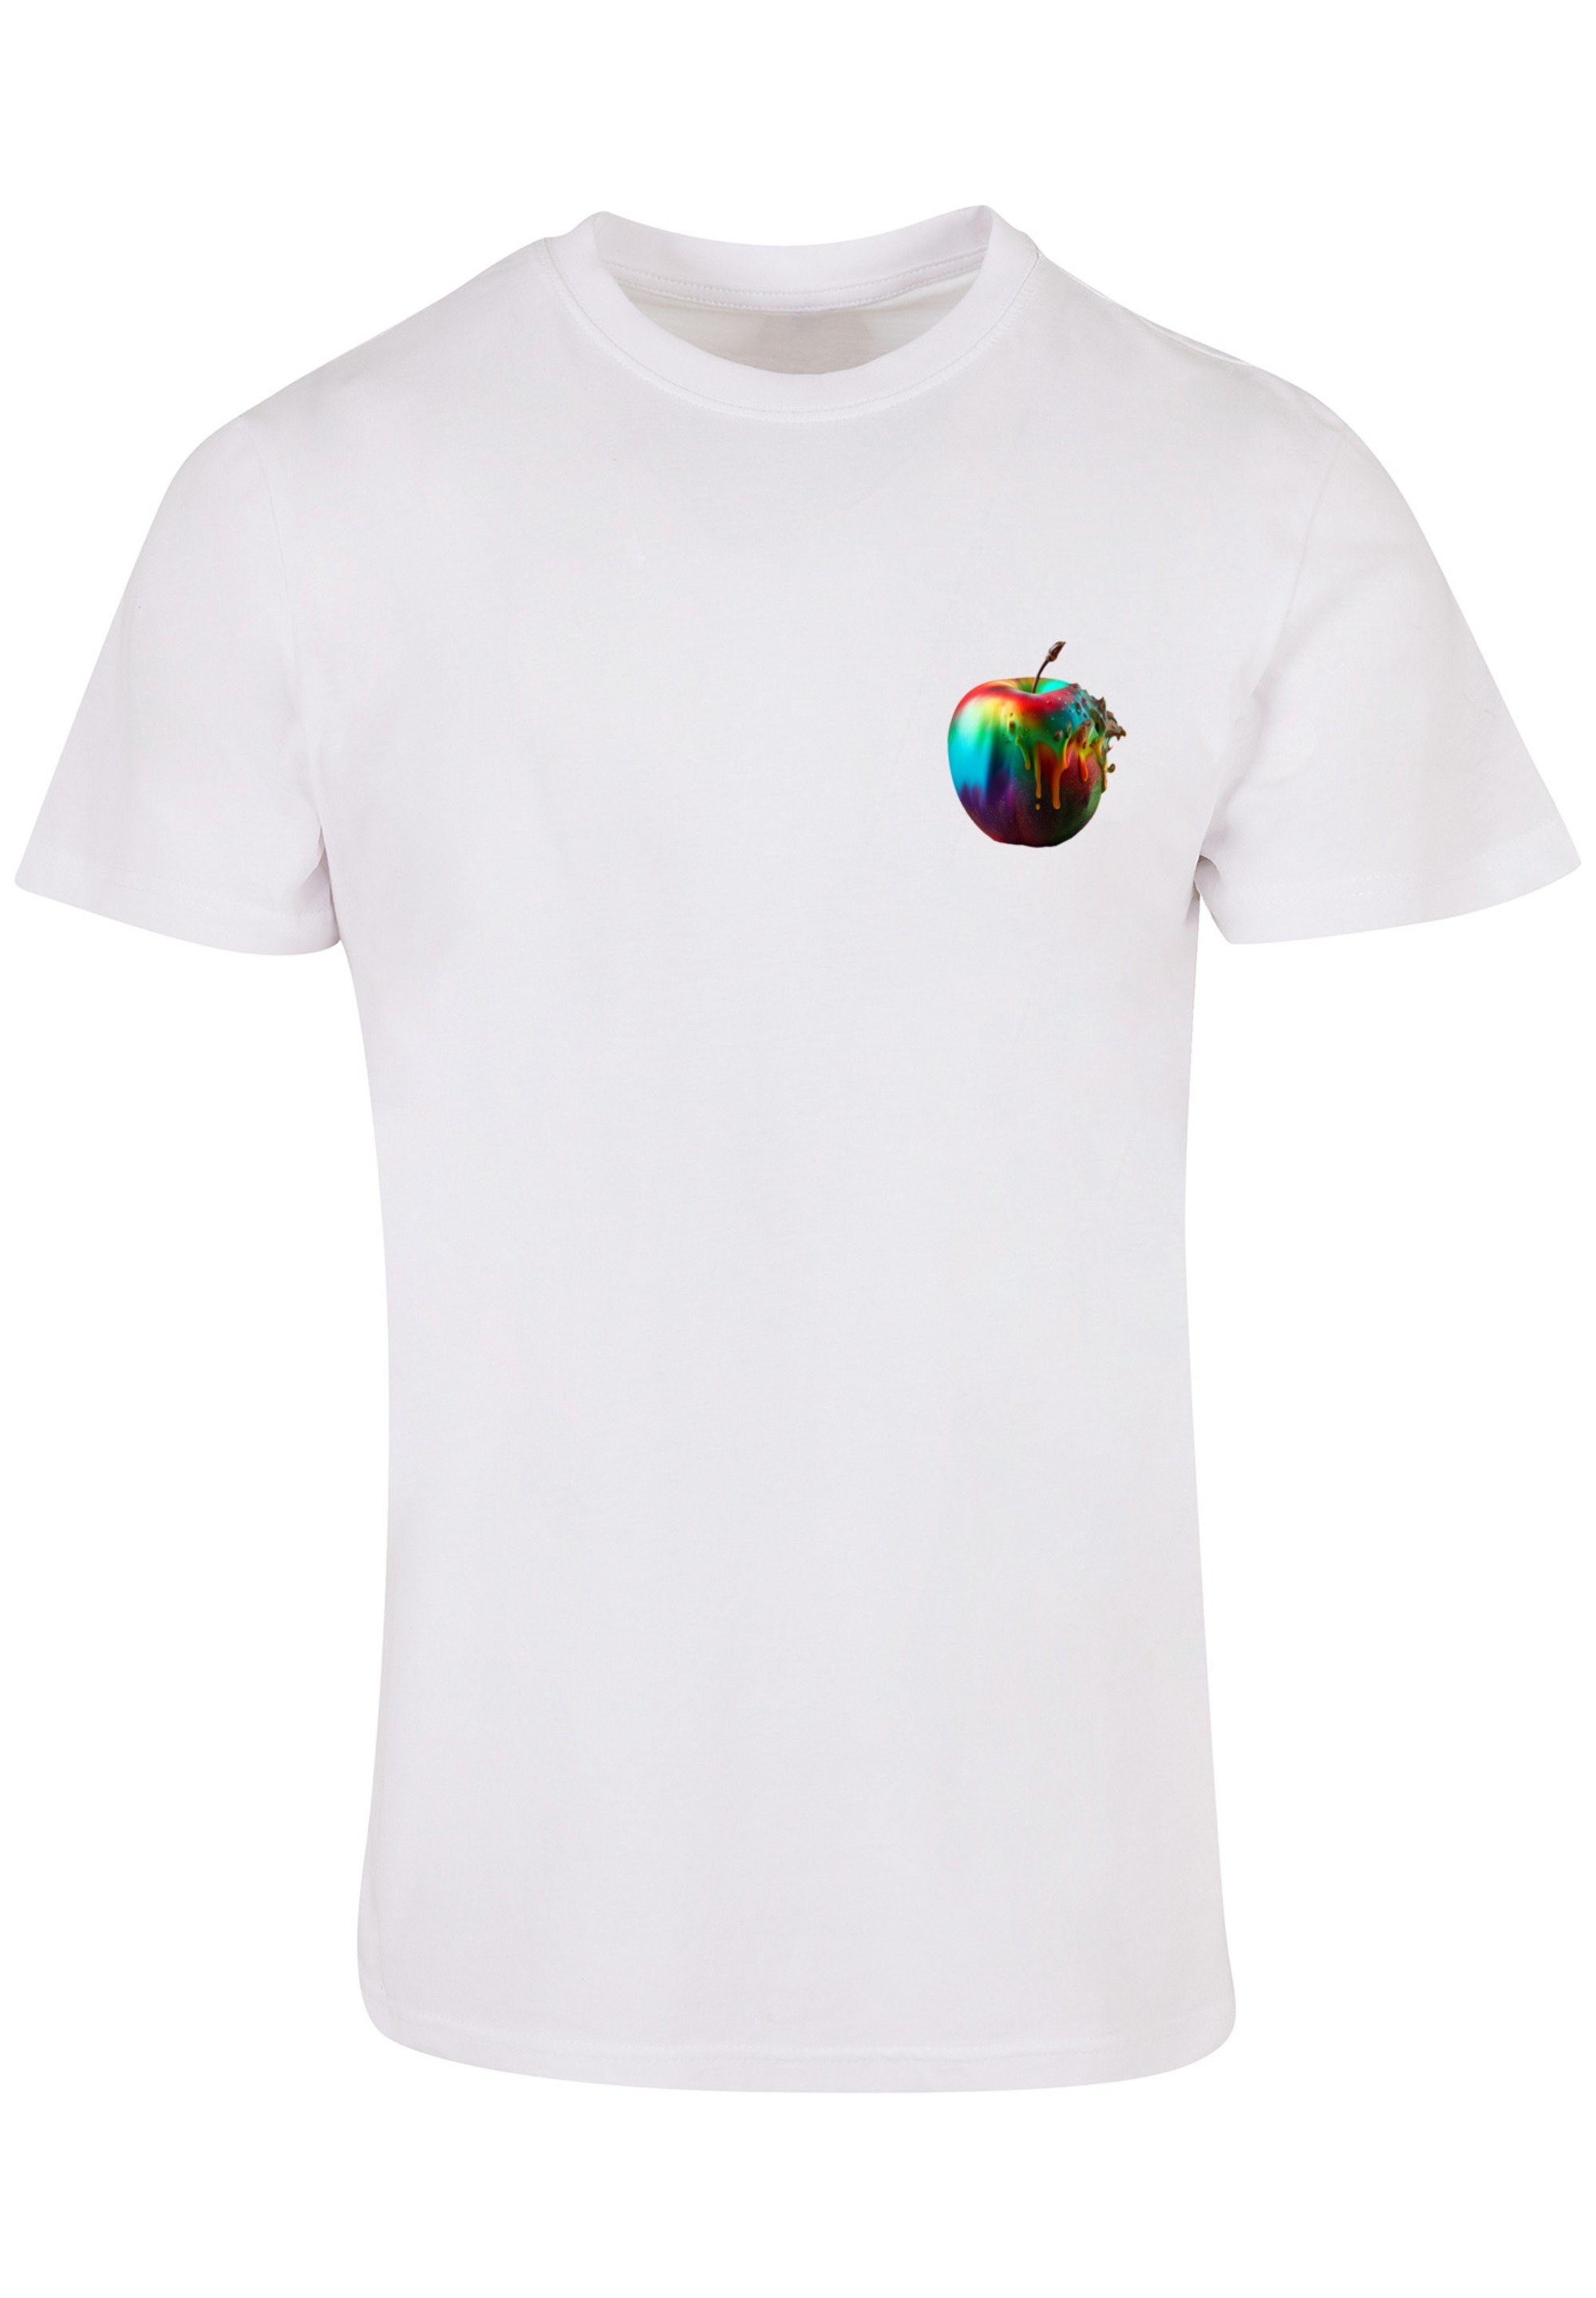 F4NT4STIC T-Shirt Colorfood Apple - Rainbow Print weiß Collection